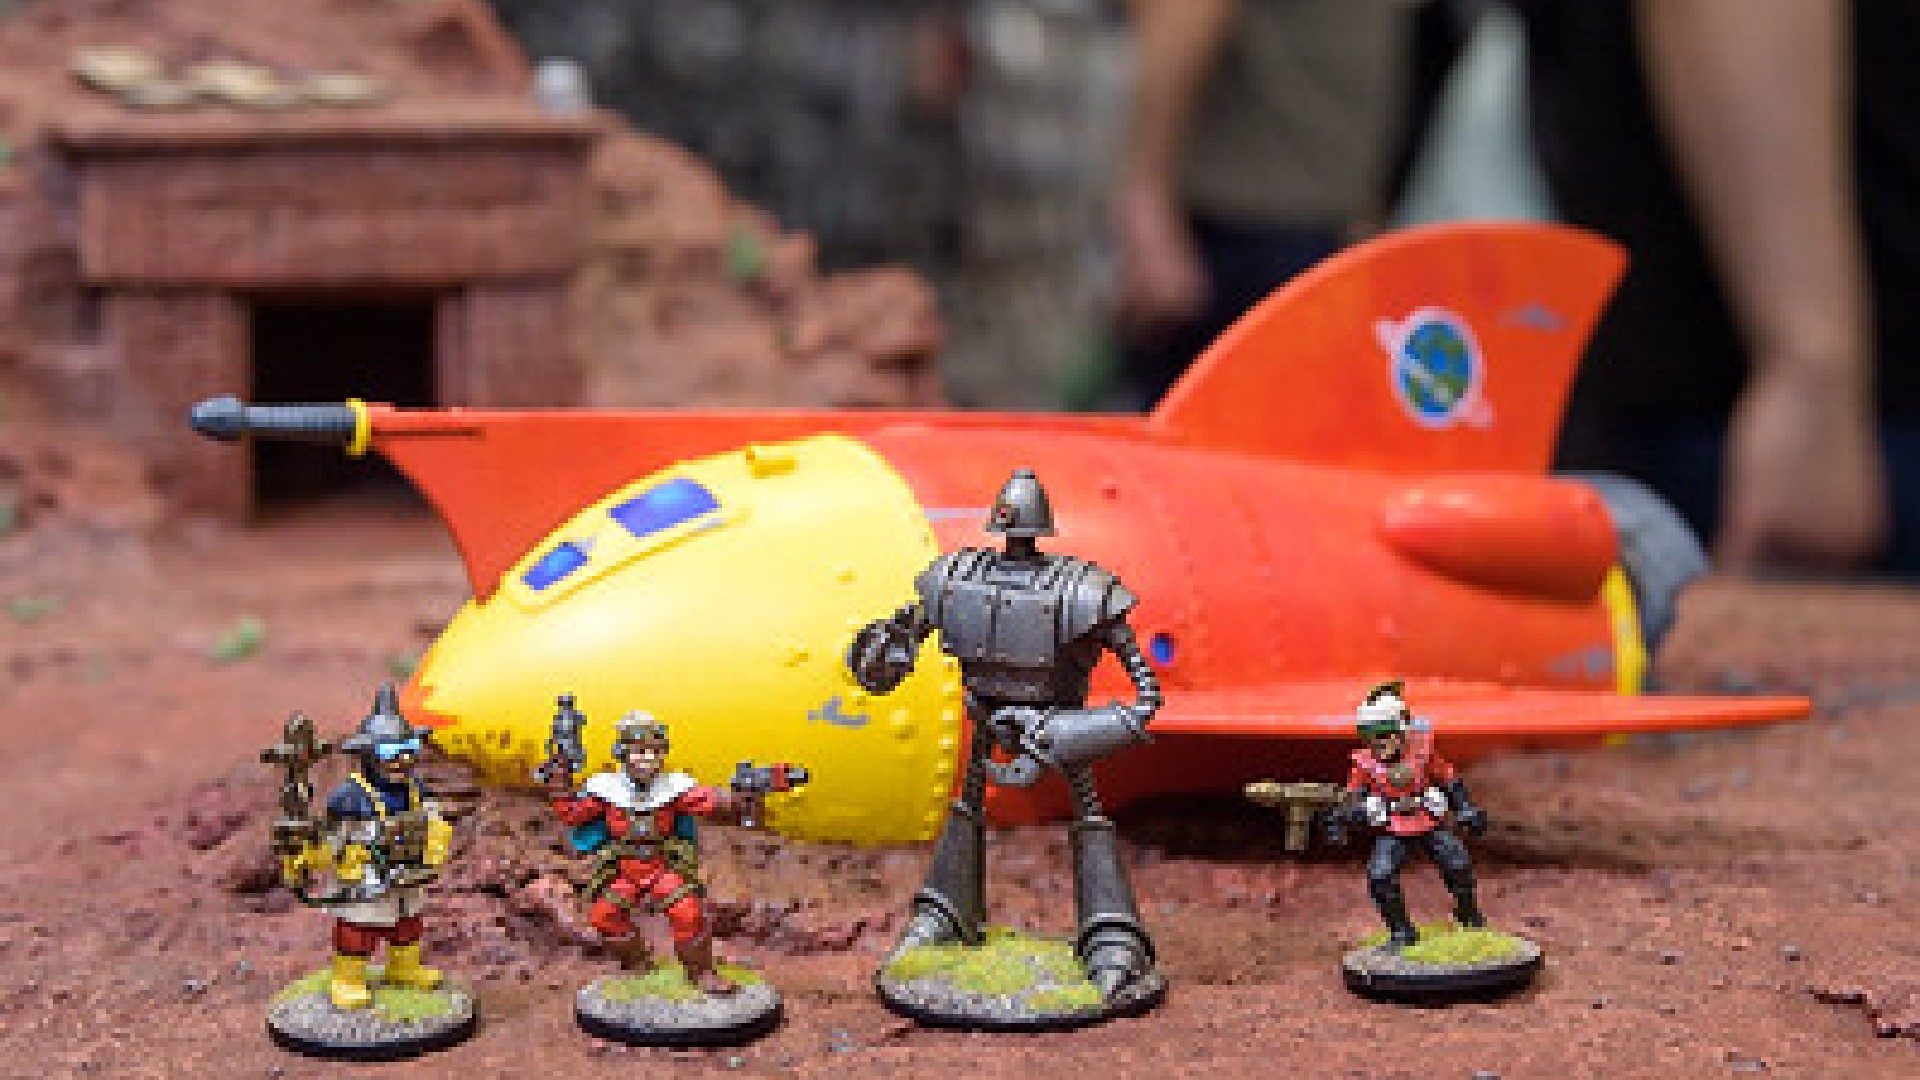 An image of four figures stood in front of a model spaceship.